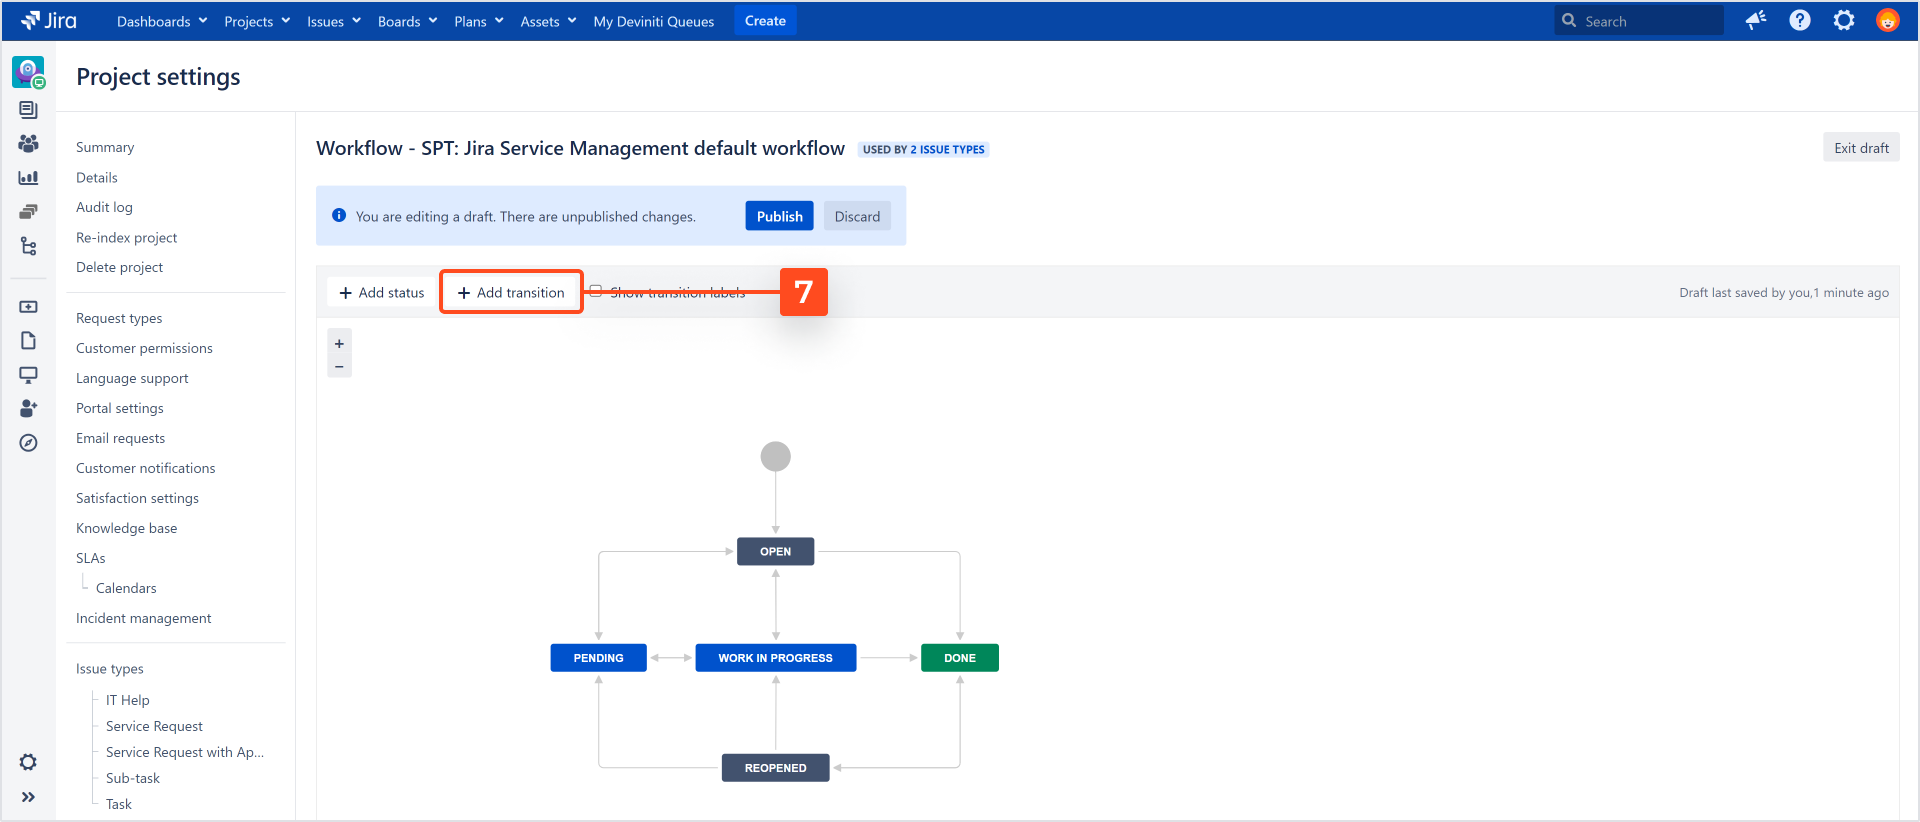 Adding a transition to the workflow with Actions for Jira Service Management